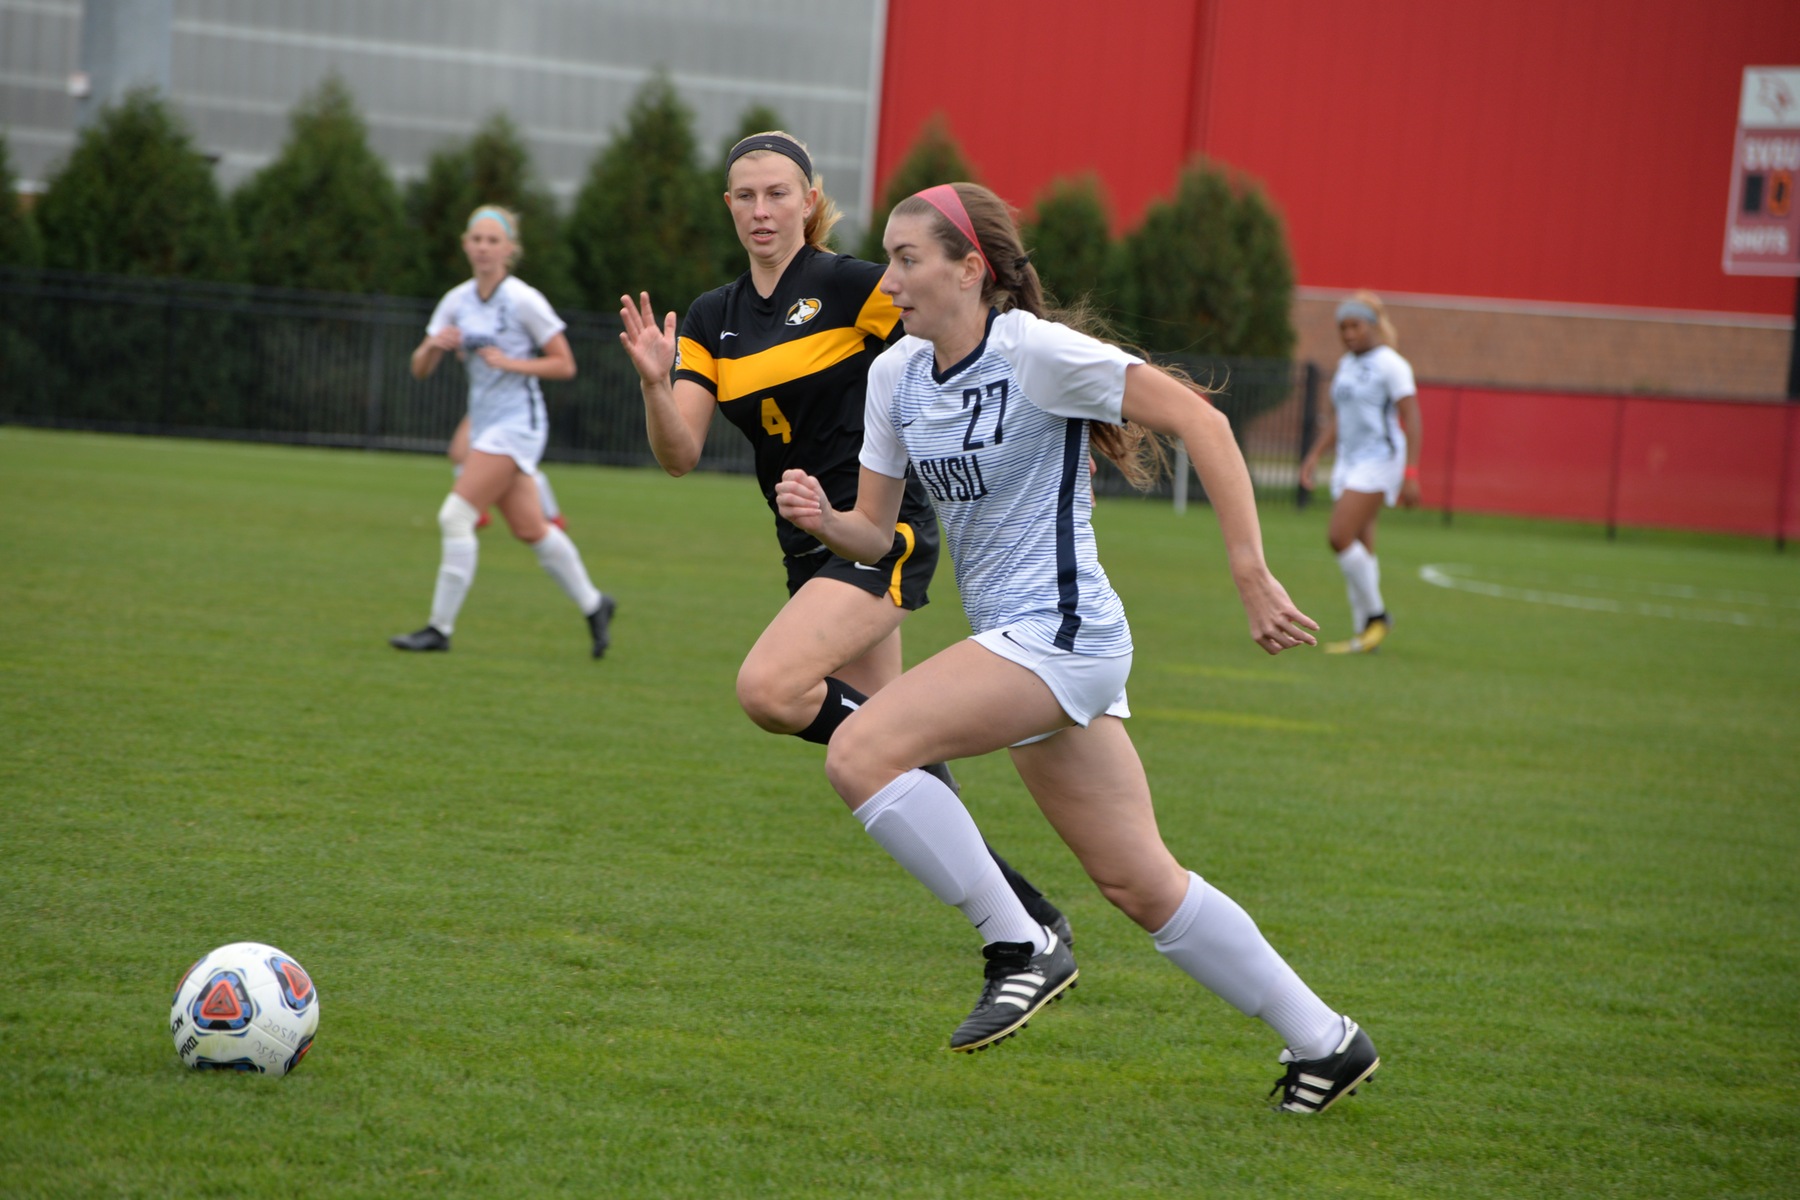 Molly Vanderhoff named to United Soccer Coaches Scholar All-North/Central Region Team